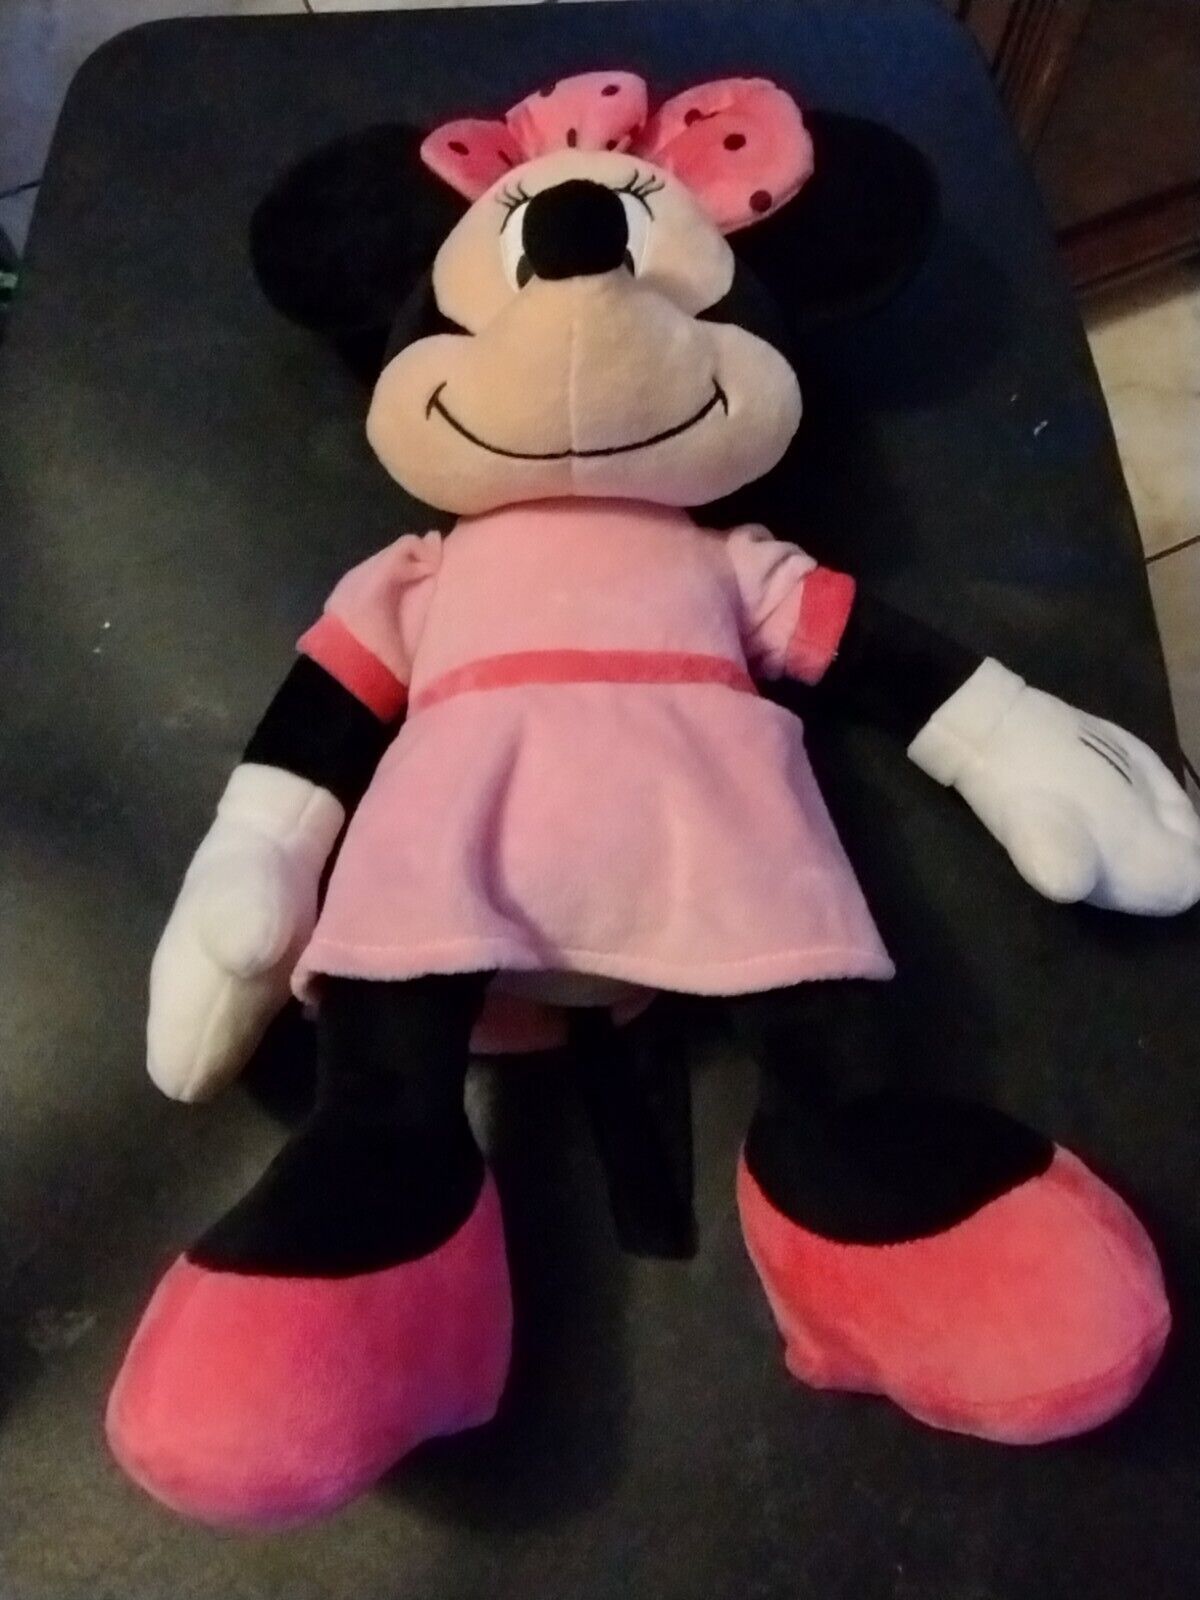 Primary image for Minnie Mouse Pink Dress plush Kohl's Cares for kids Toy 22" RARR Black Polka Dot